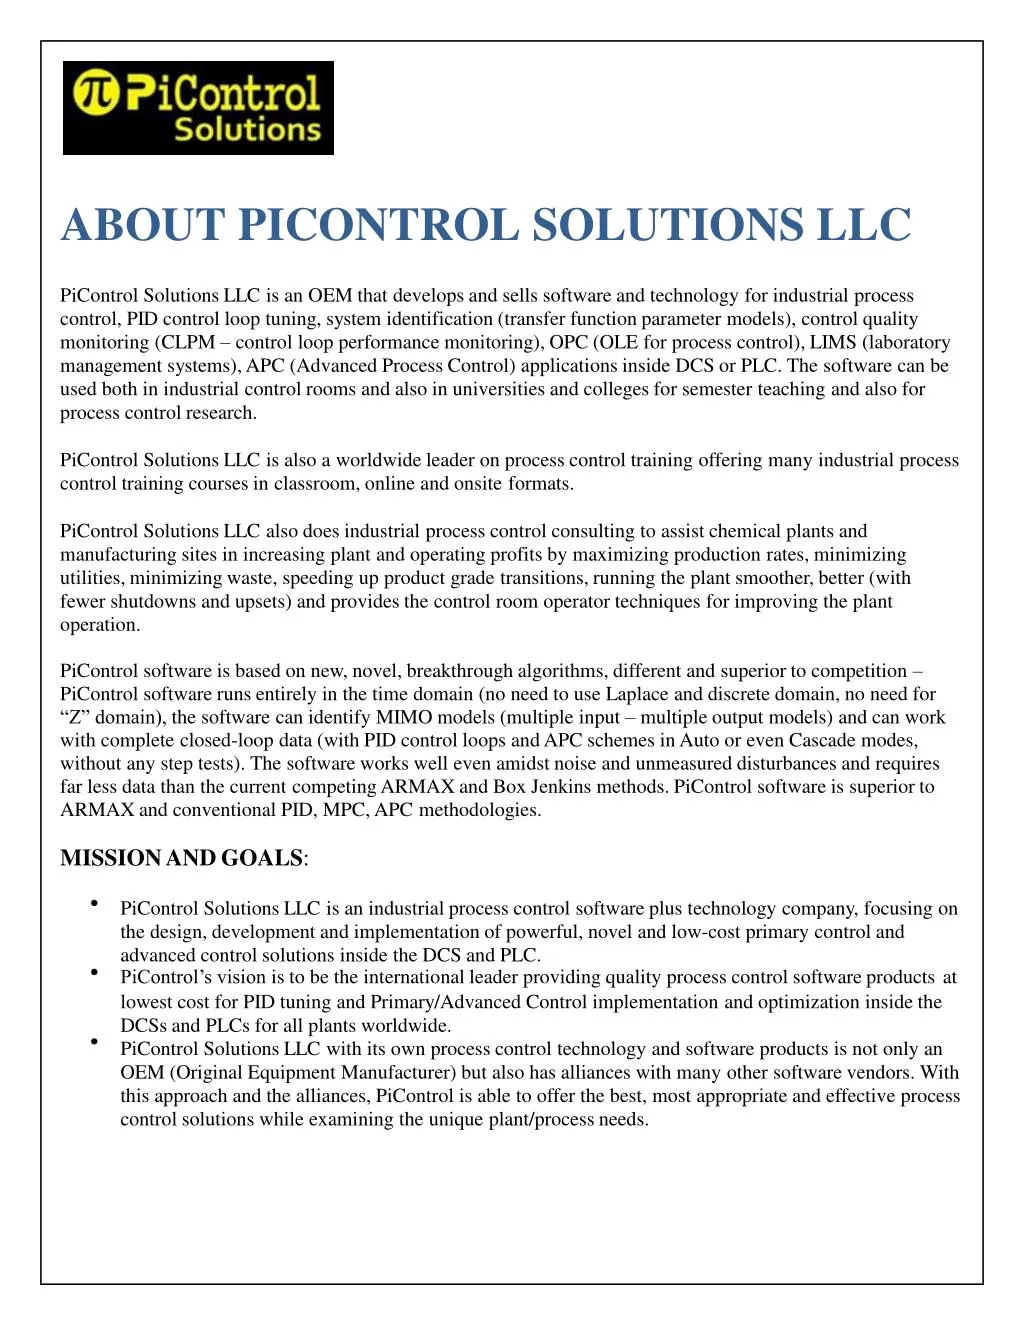 about picontrol solutions llc